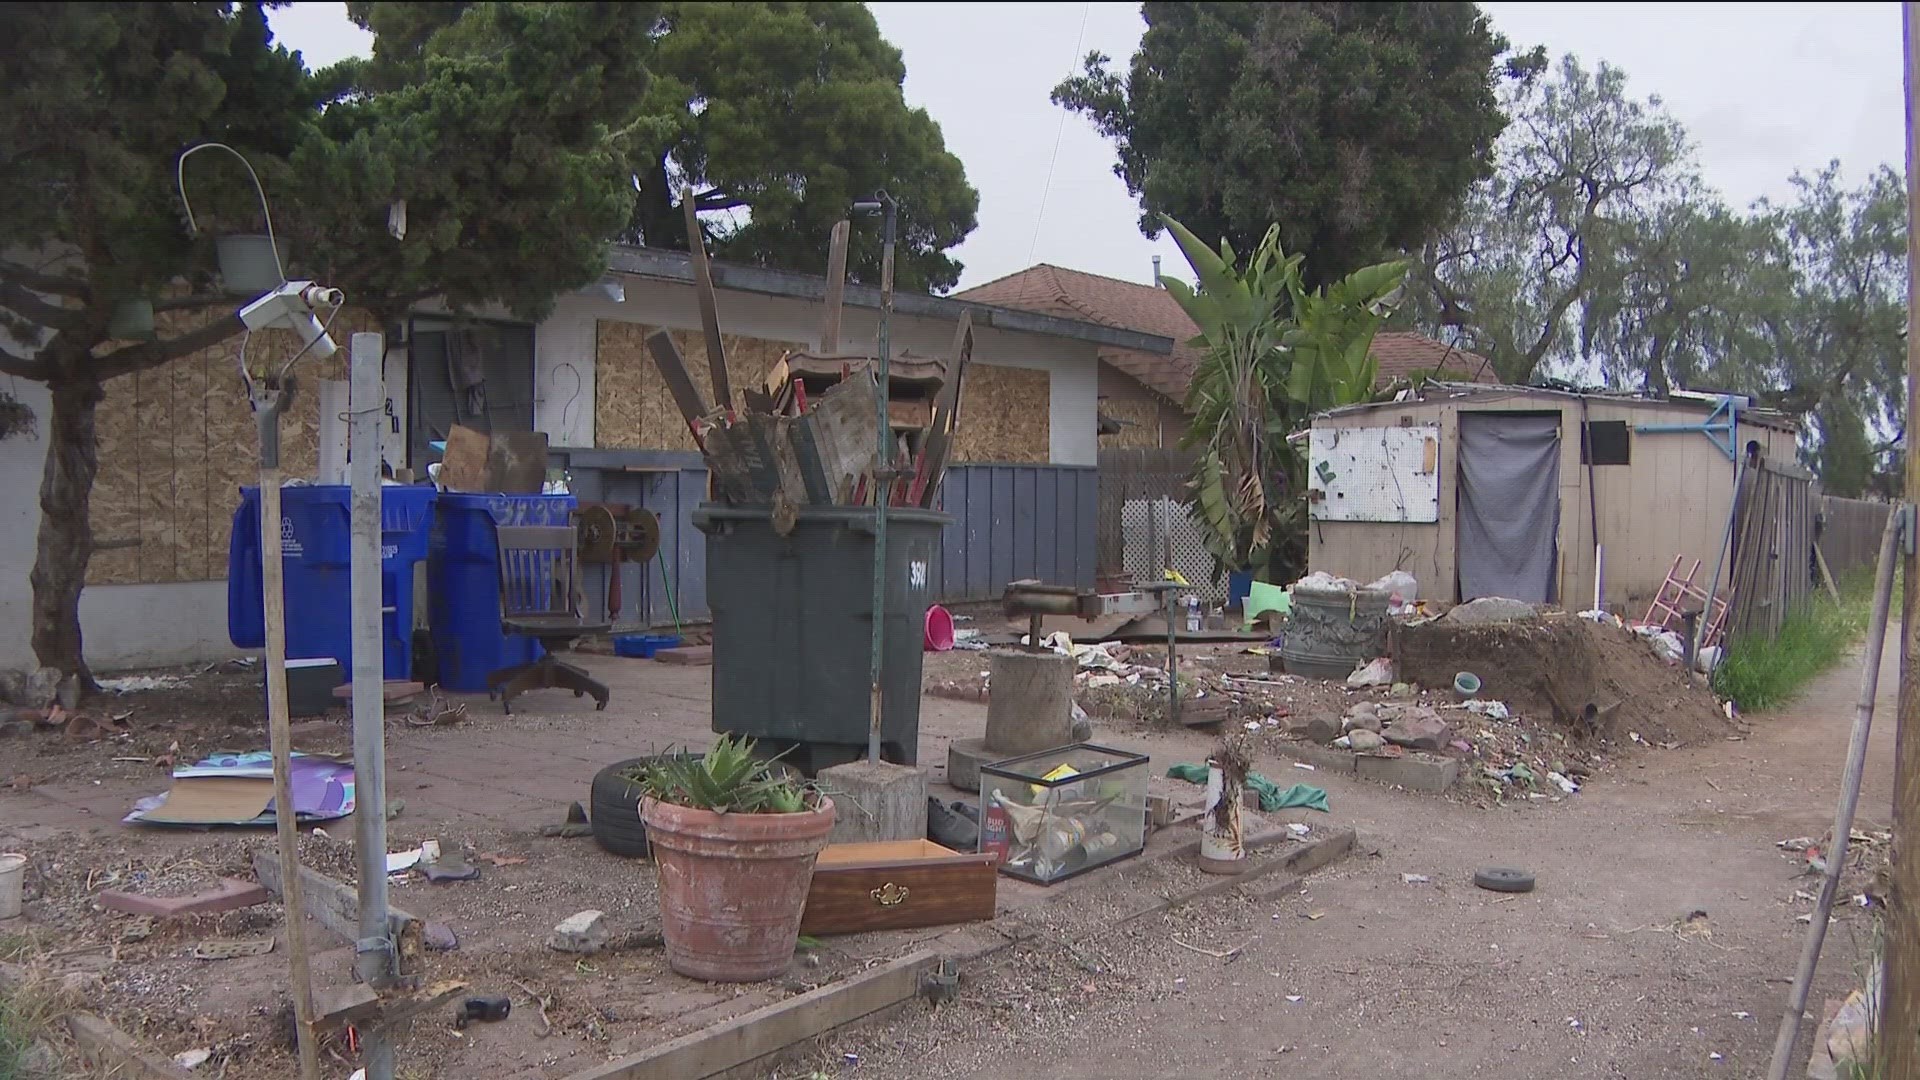 Neighbors said the problem in City Heights started late last year and has gone from bad to worse - they also fear that animals are being neglected.